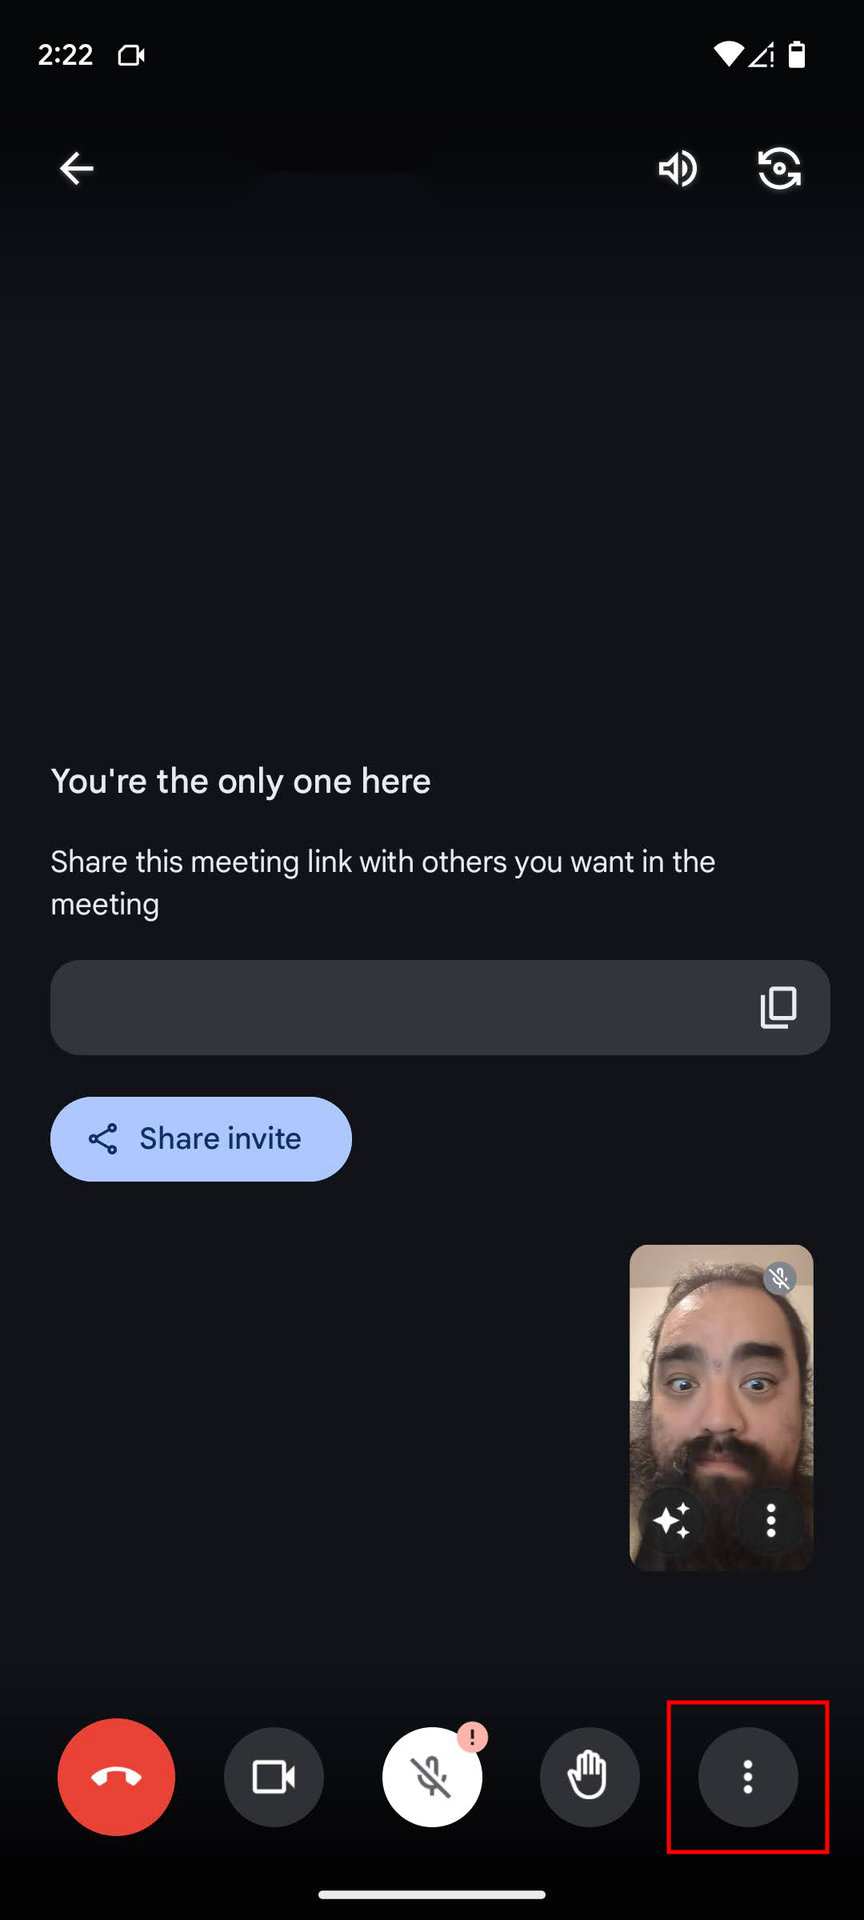 How to share your screen on Google Meet (1)